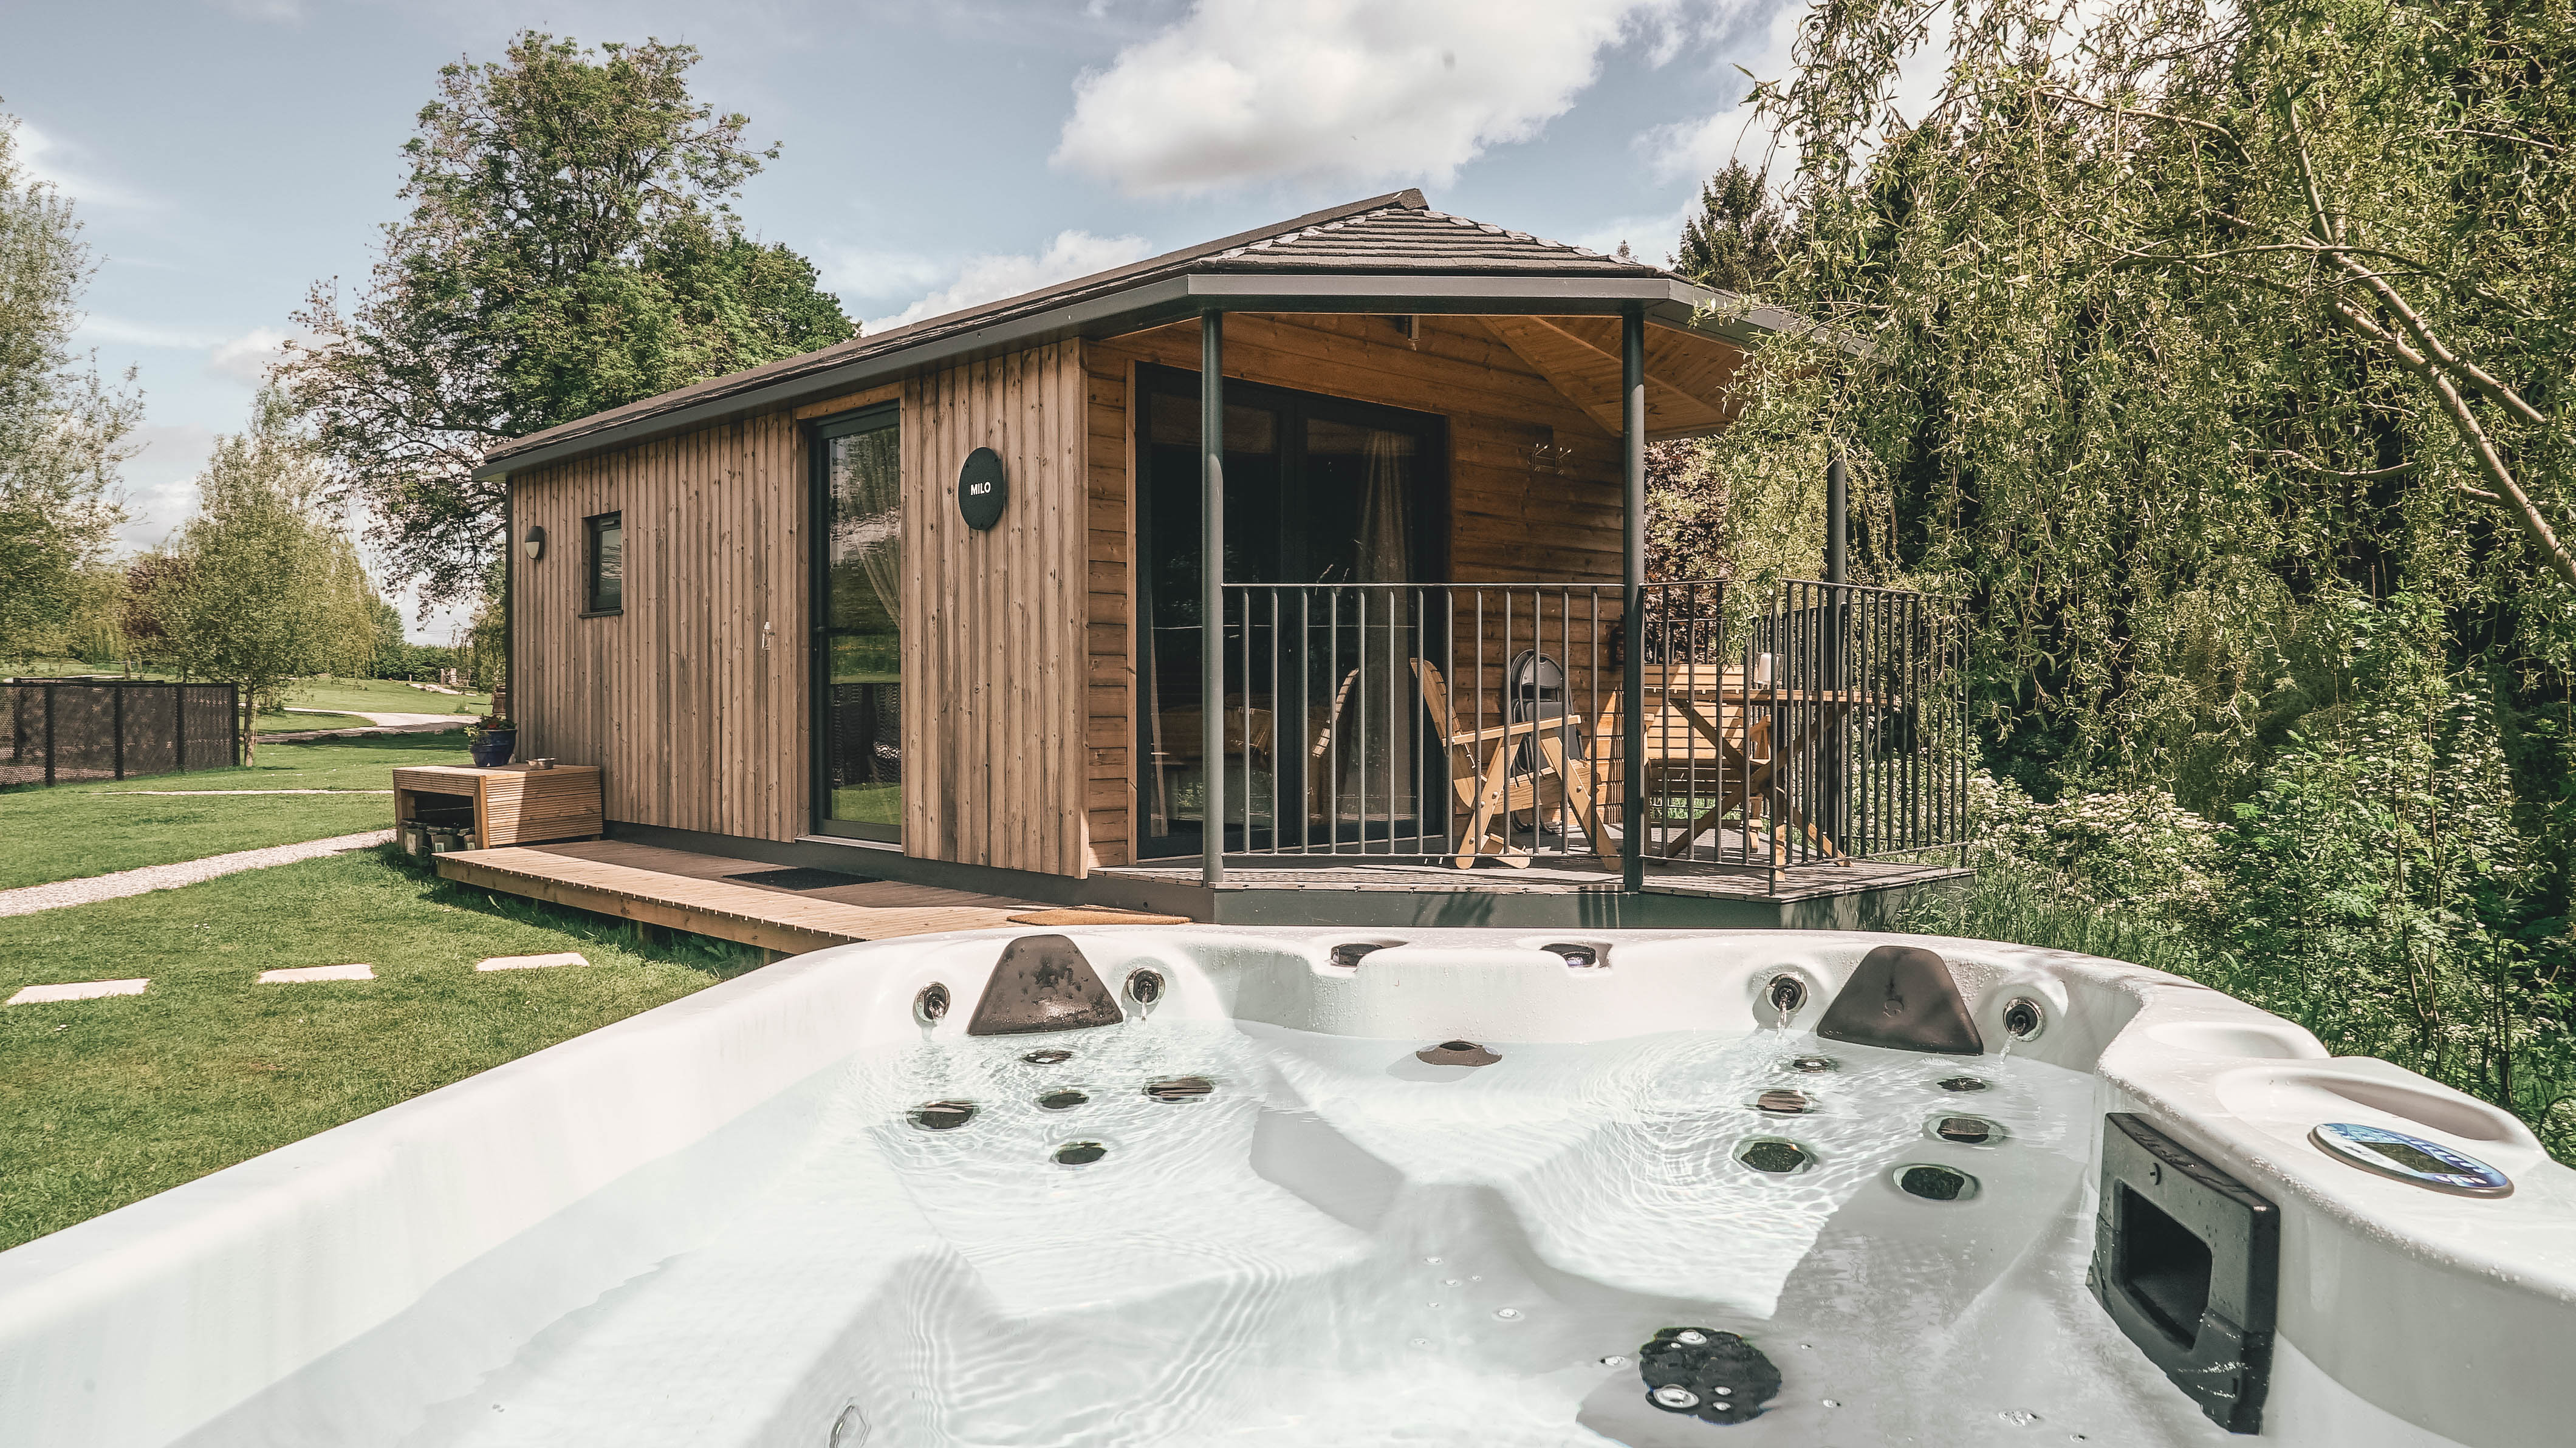 Riverside Cabins is an ideal spot for some rest and relaxation